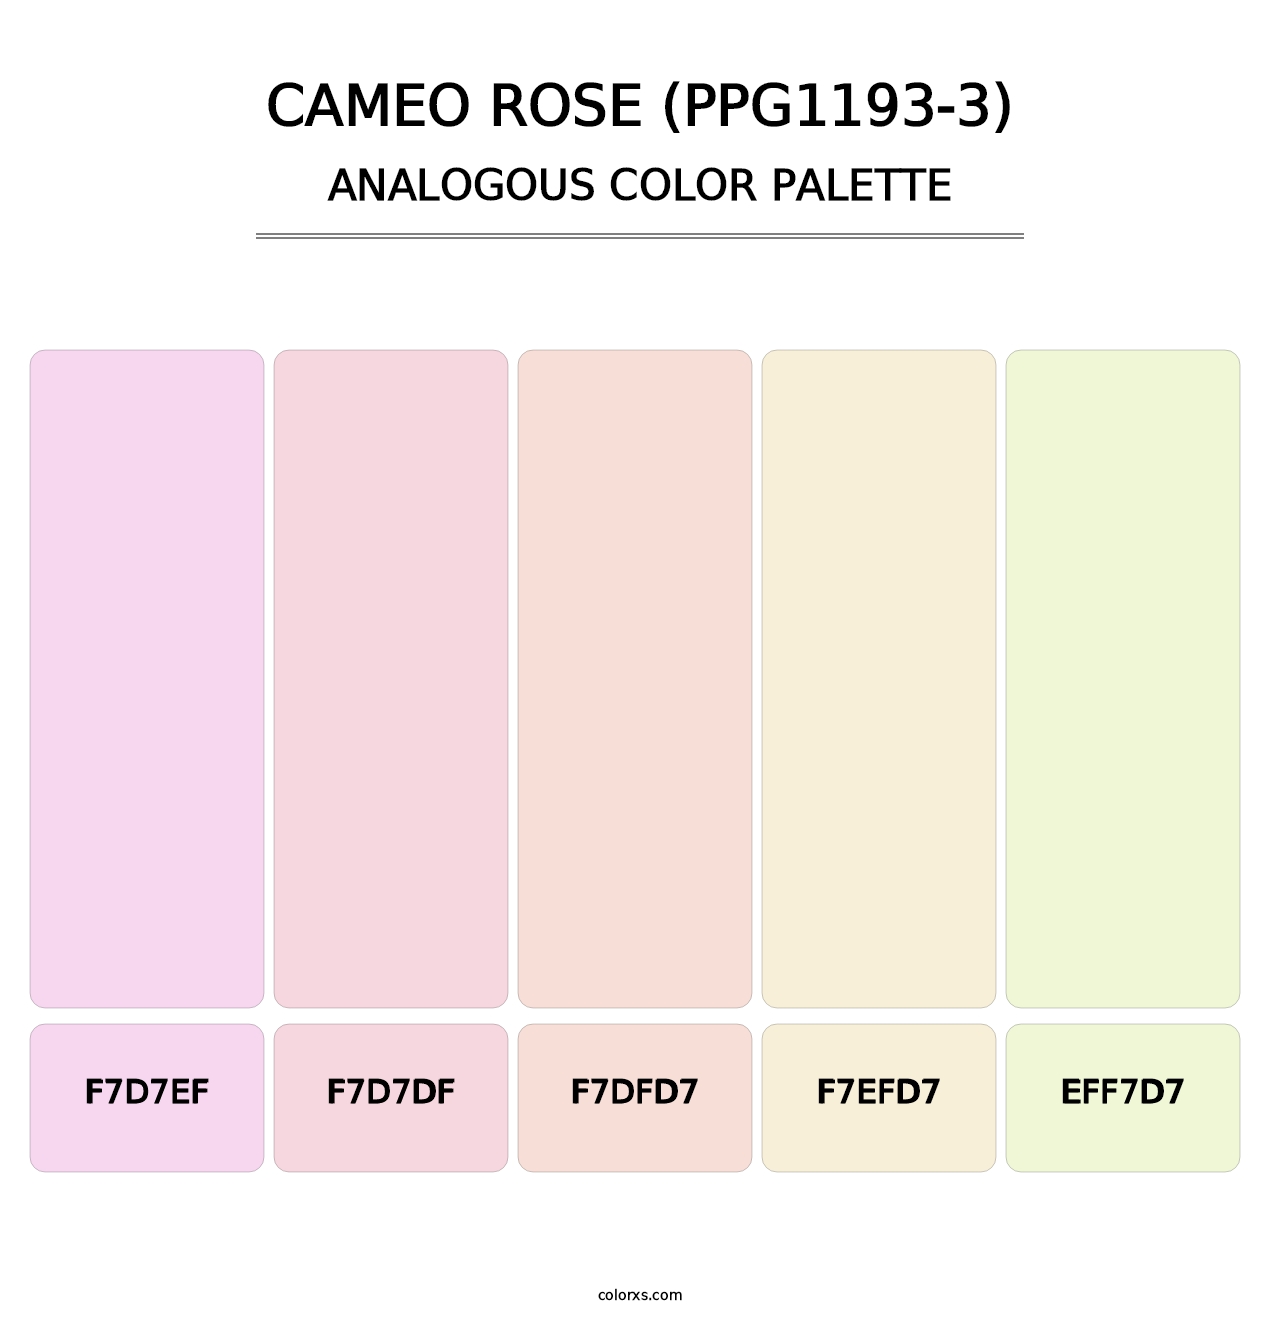 Cameo Rose (PPG1193-3) - Analogous Color Palette